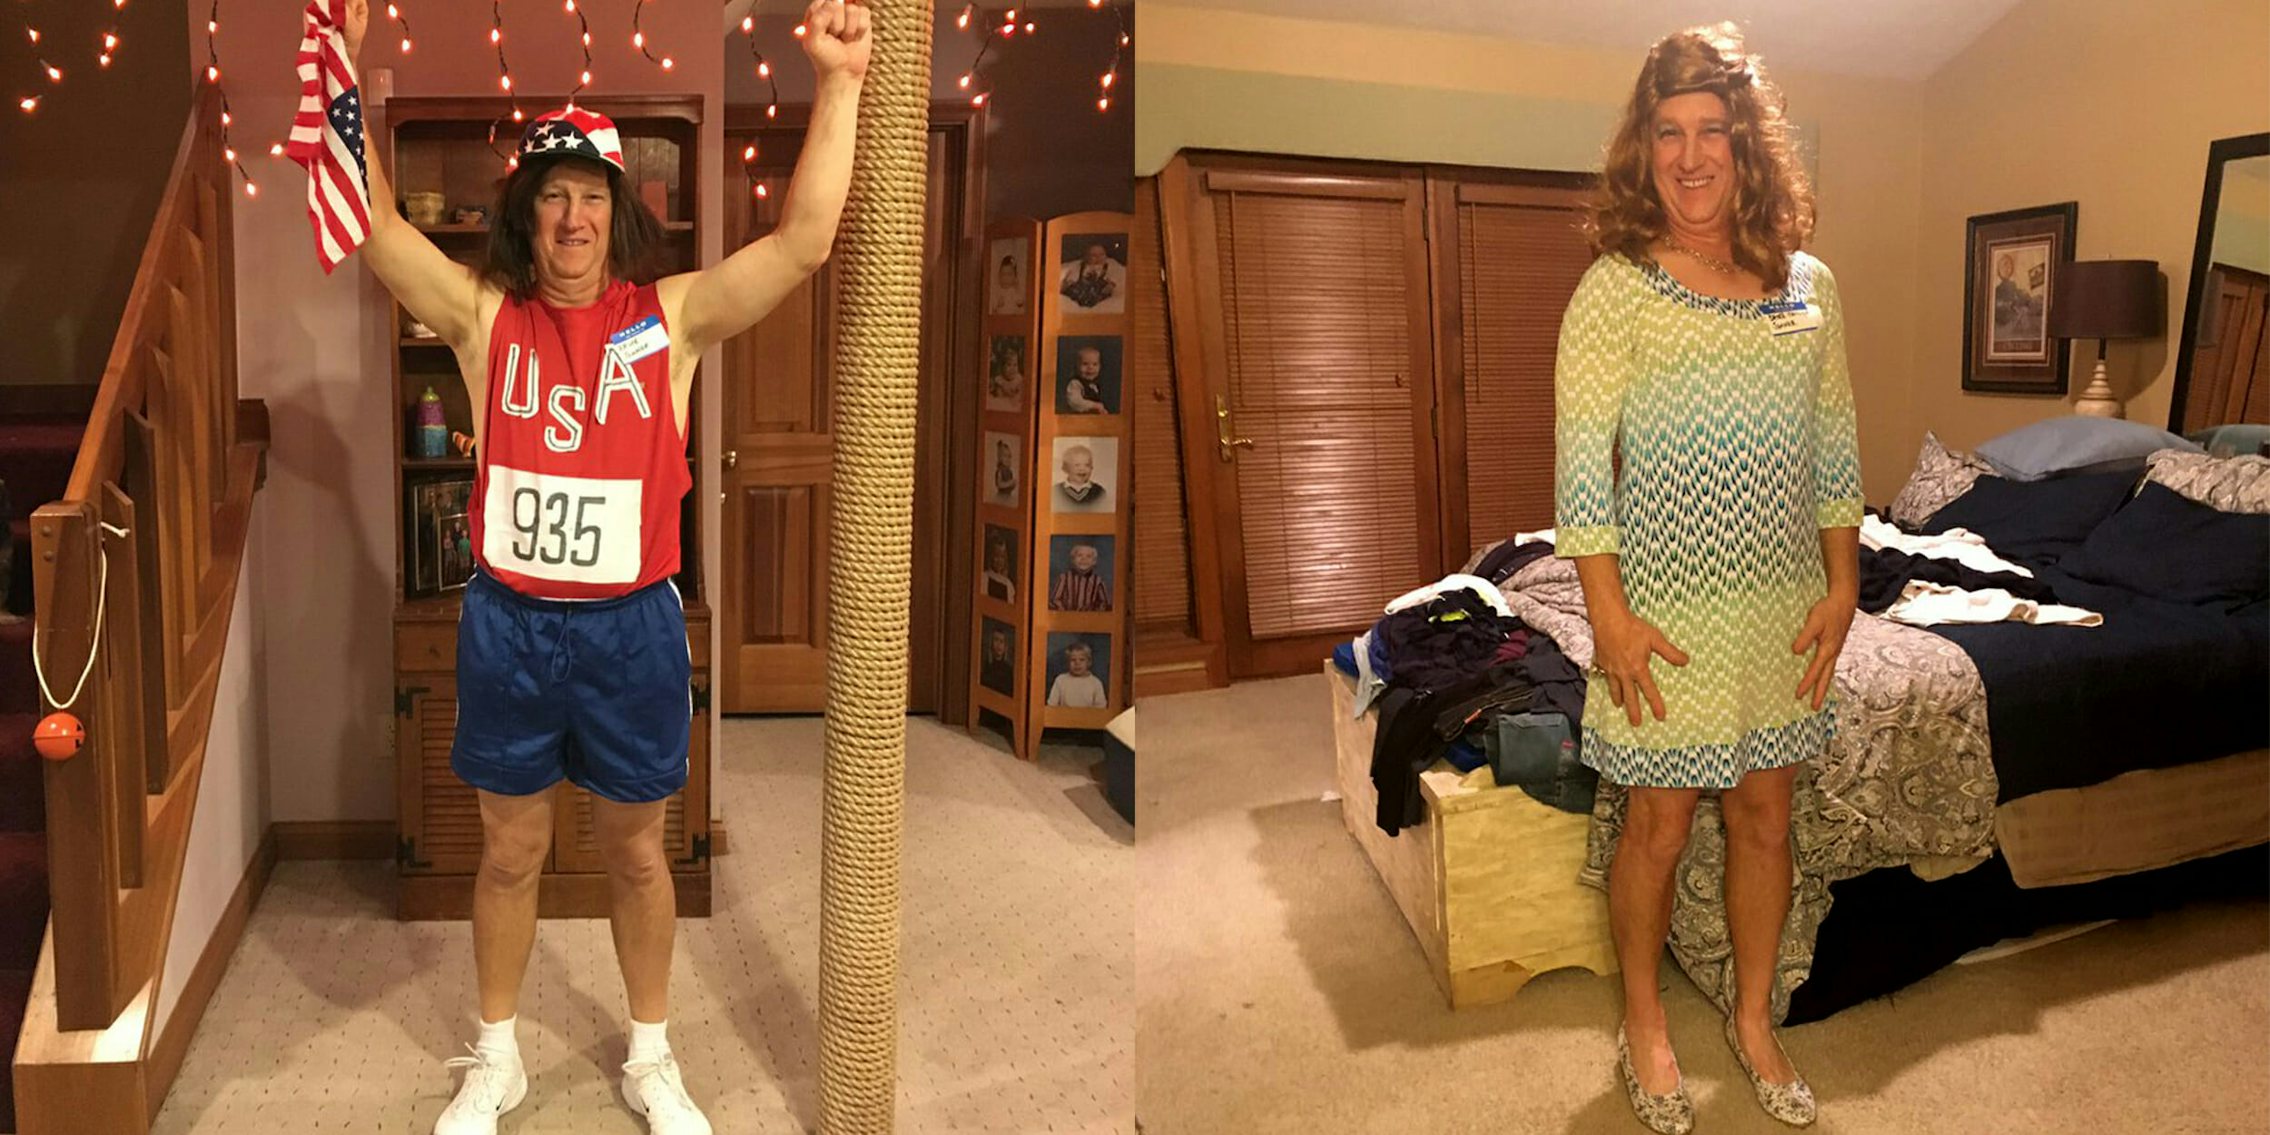 Man dressed as Caitlyn Jenner pre and post-transition